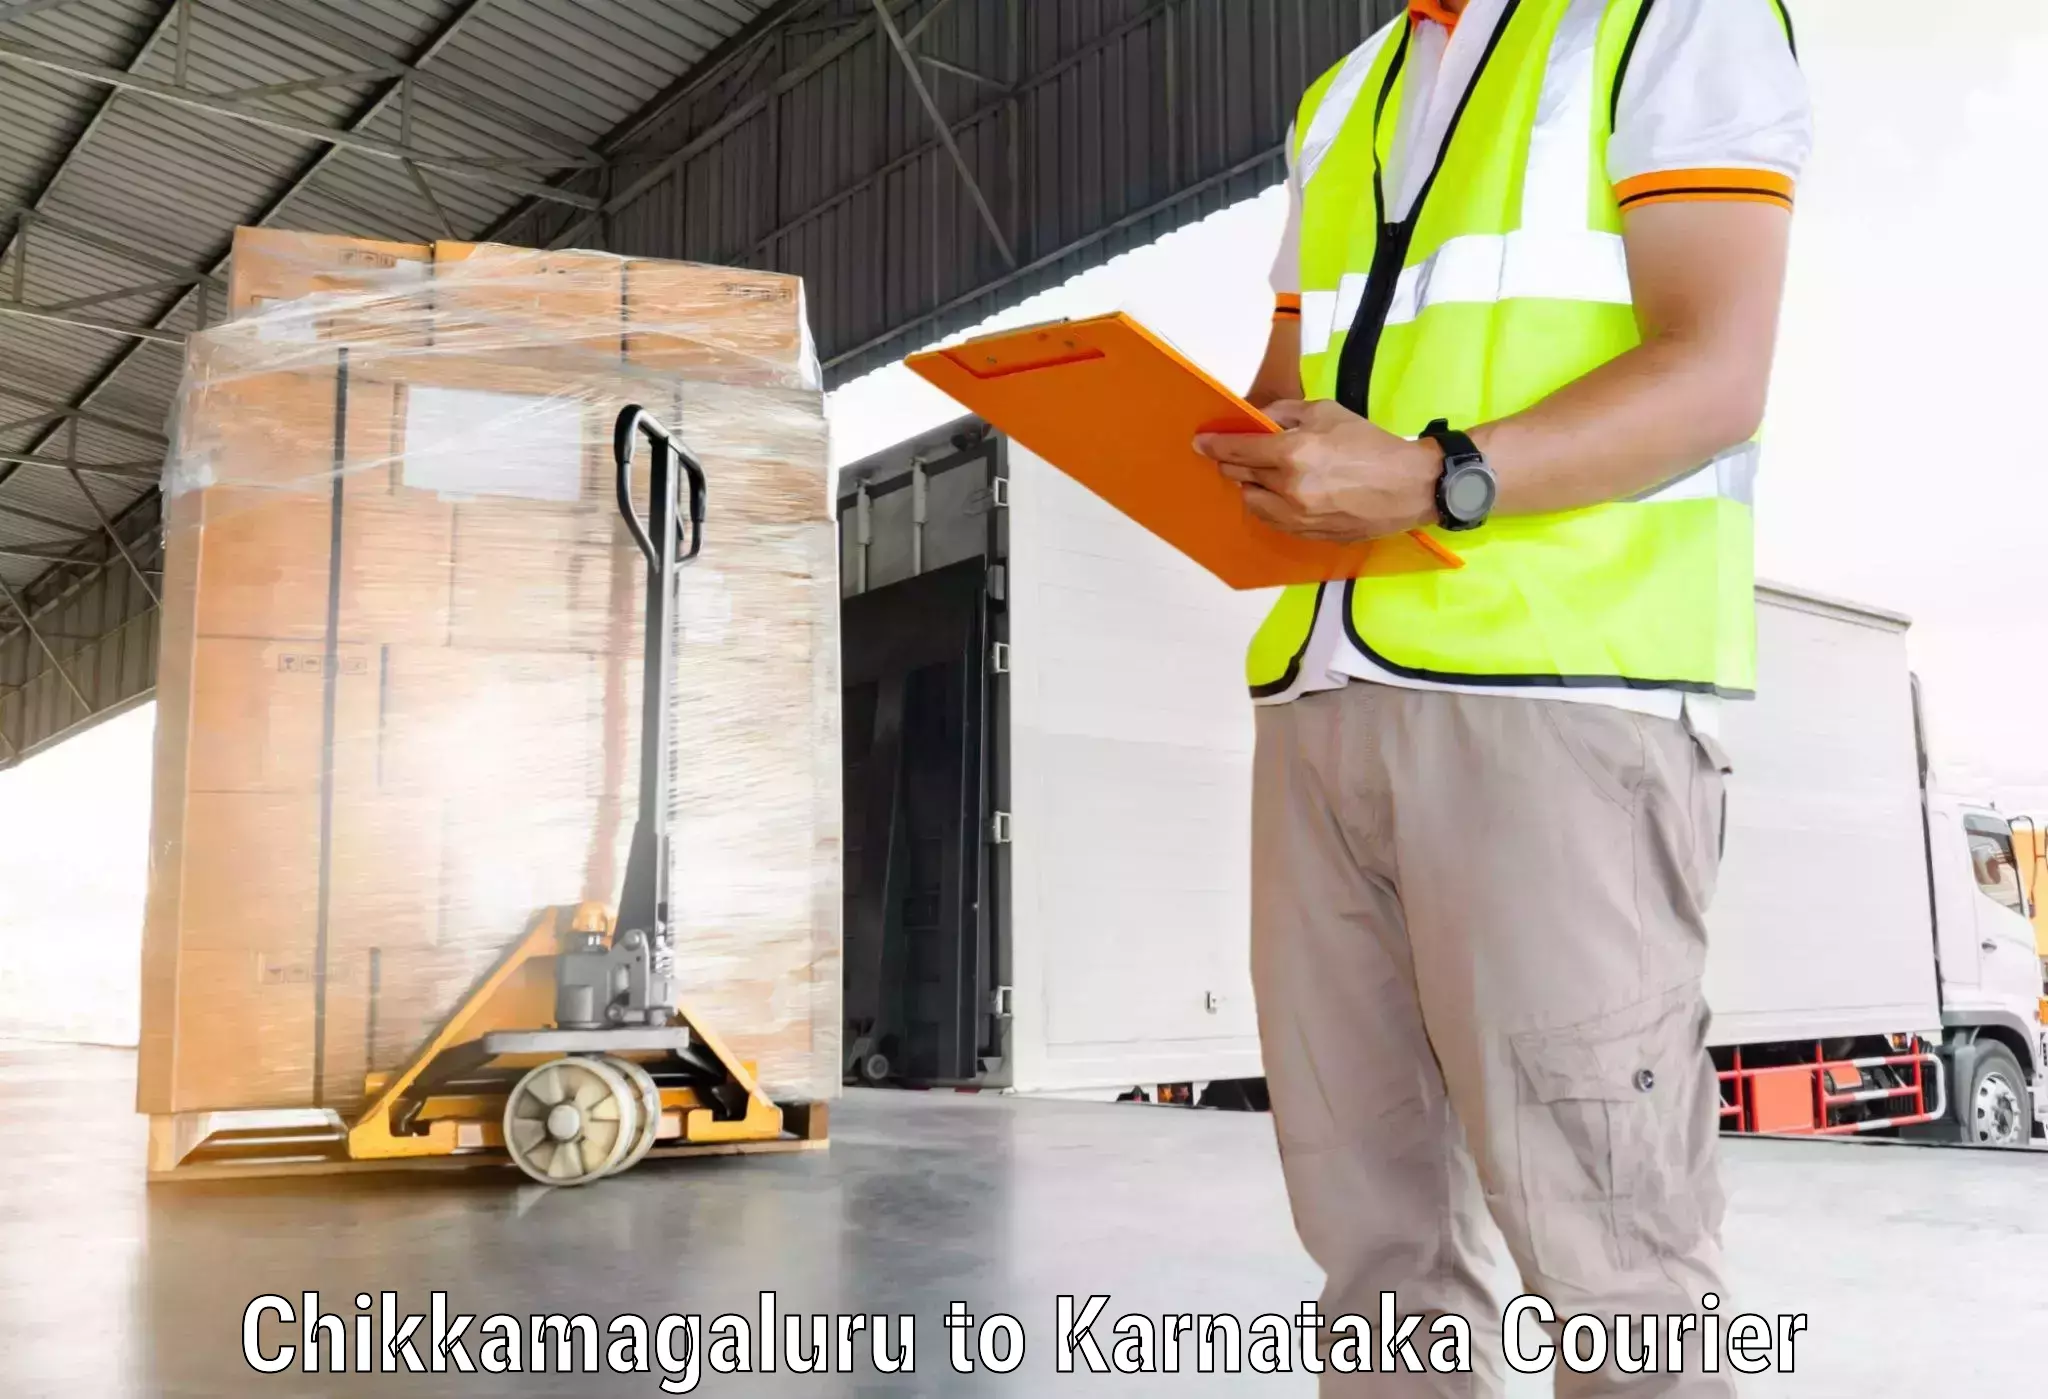 Subscription-based courier Chikkamagaluru to Indian Institute of Science Bangalore